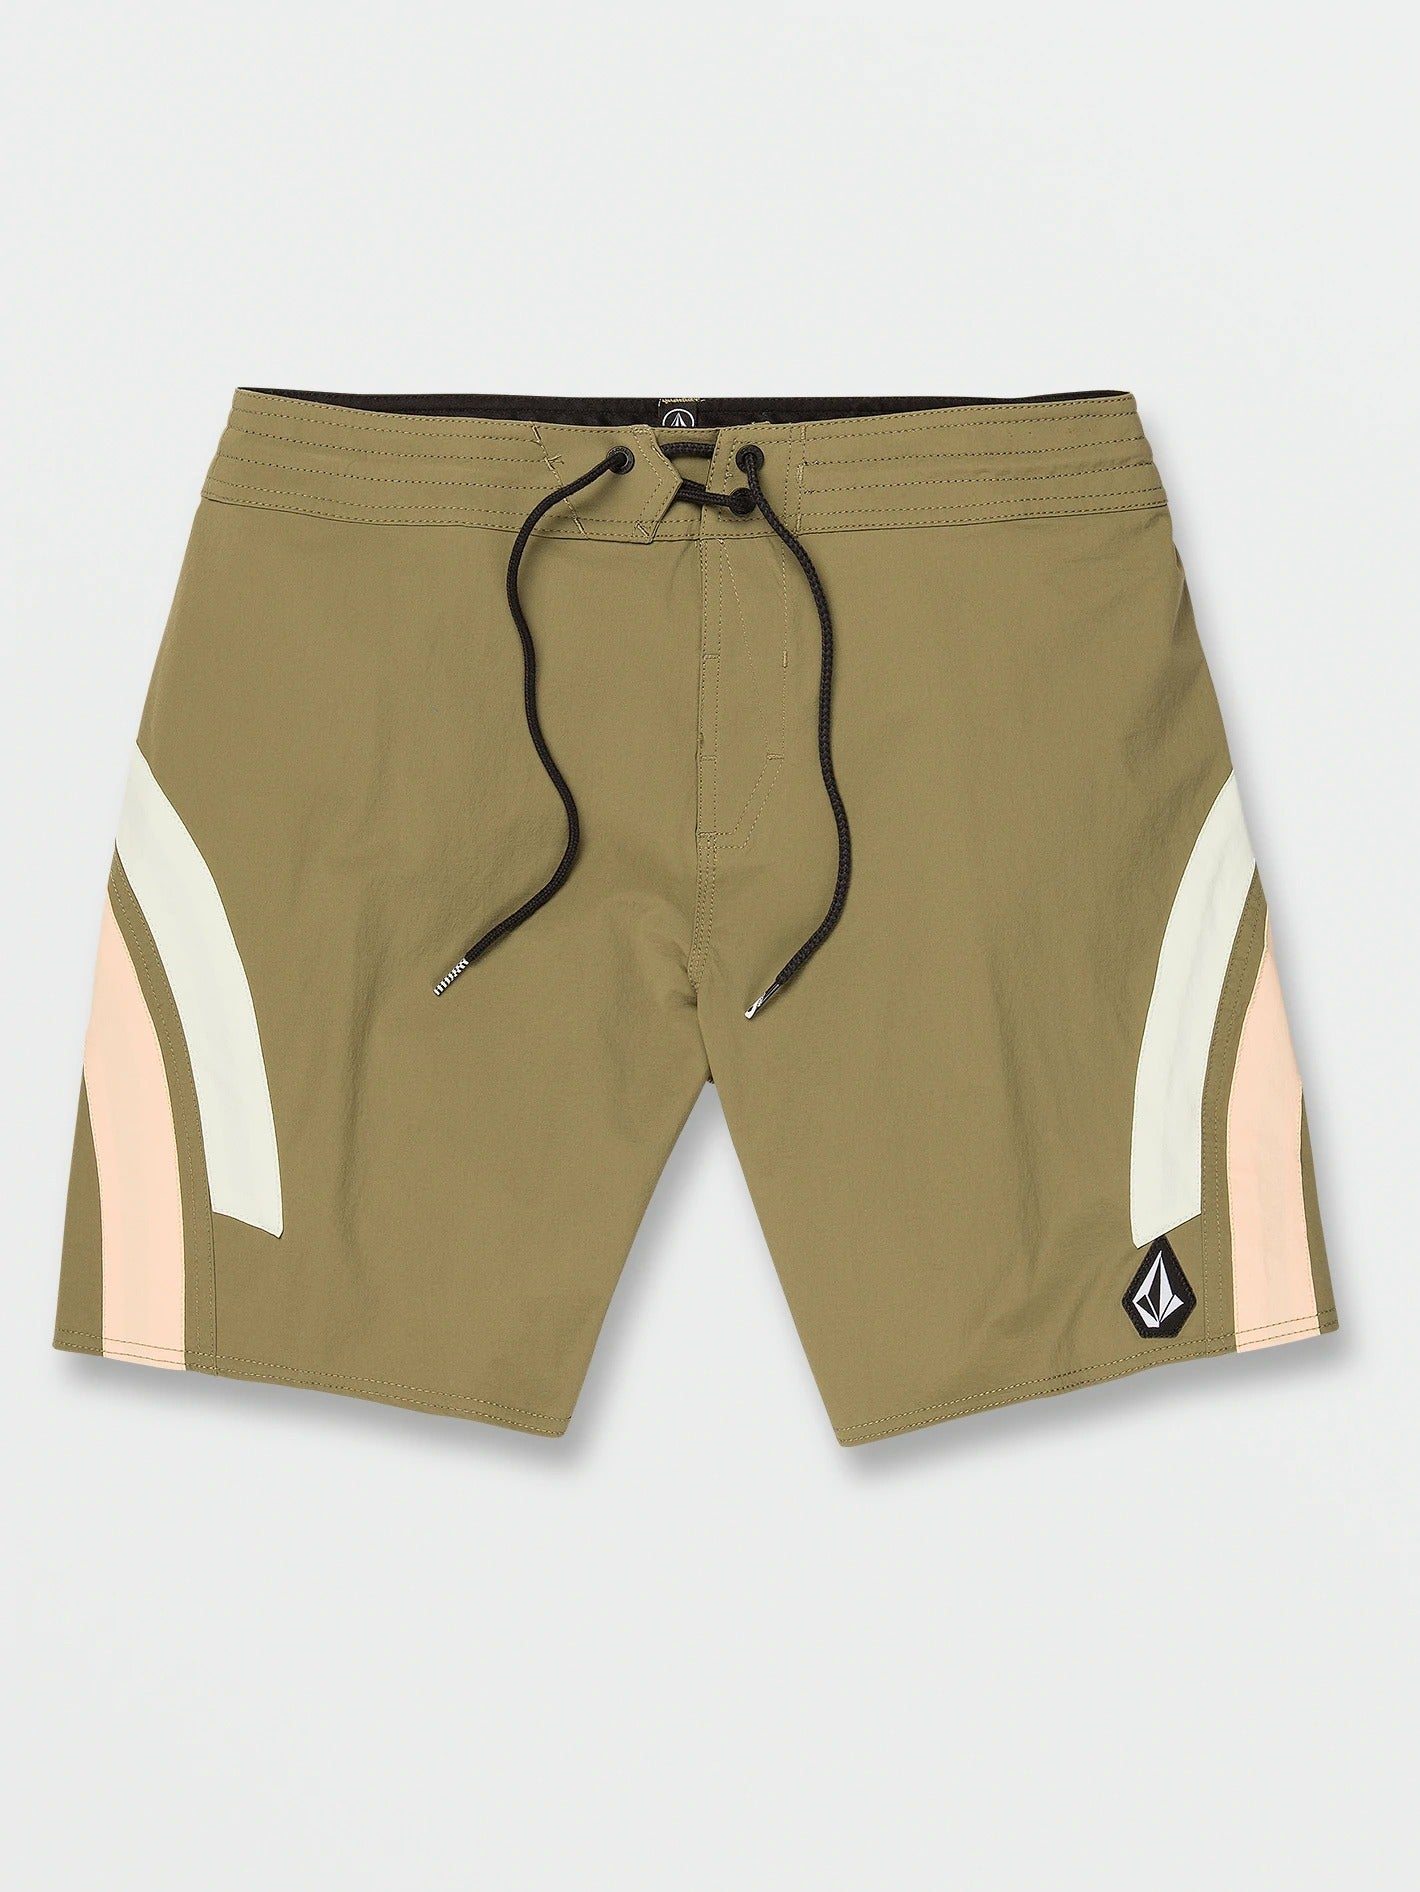 Image of Volcom Mens Boardshorts Arched Liberator